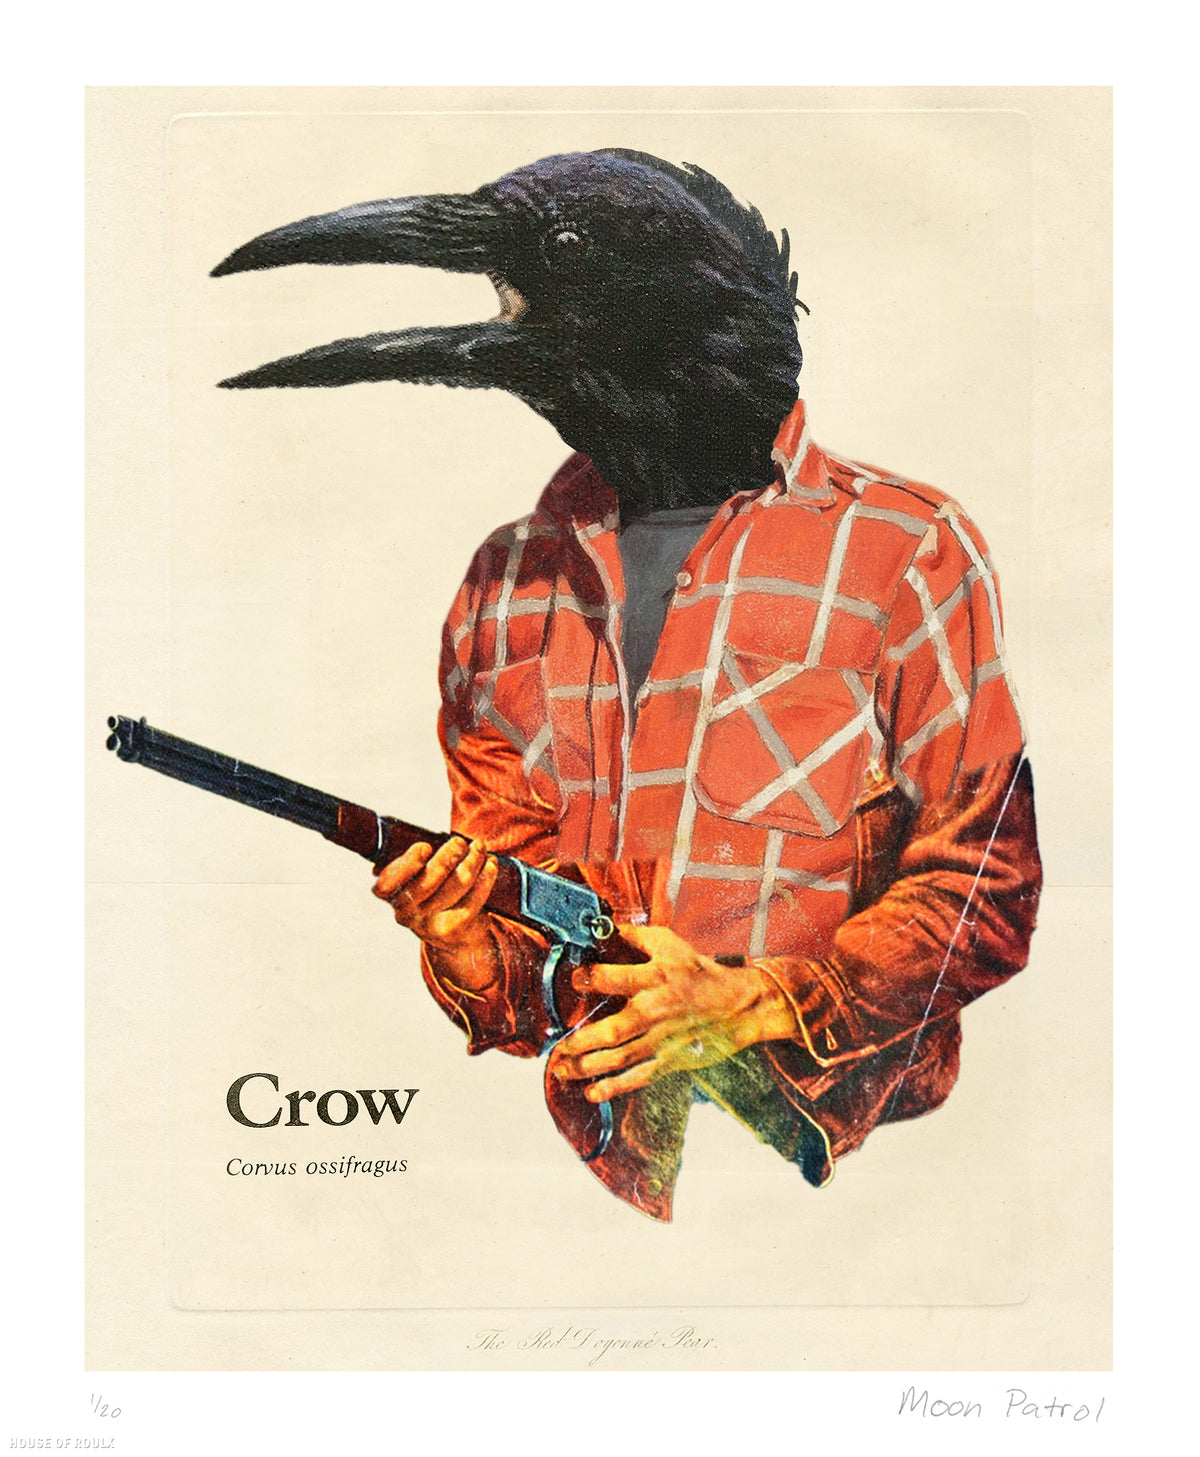 Moon Patrol &quot;Crow&quot; - Archival Print, Limited Edition of 20 - 14 x 17&quot;